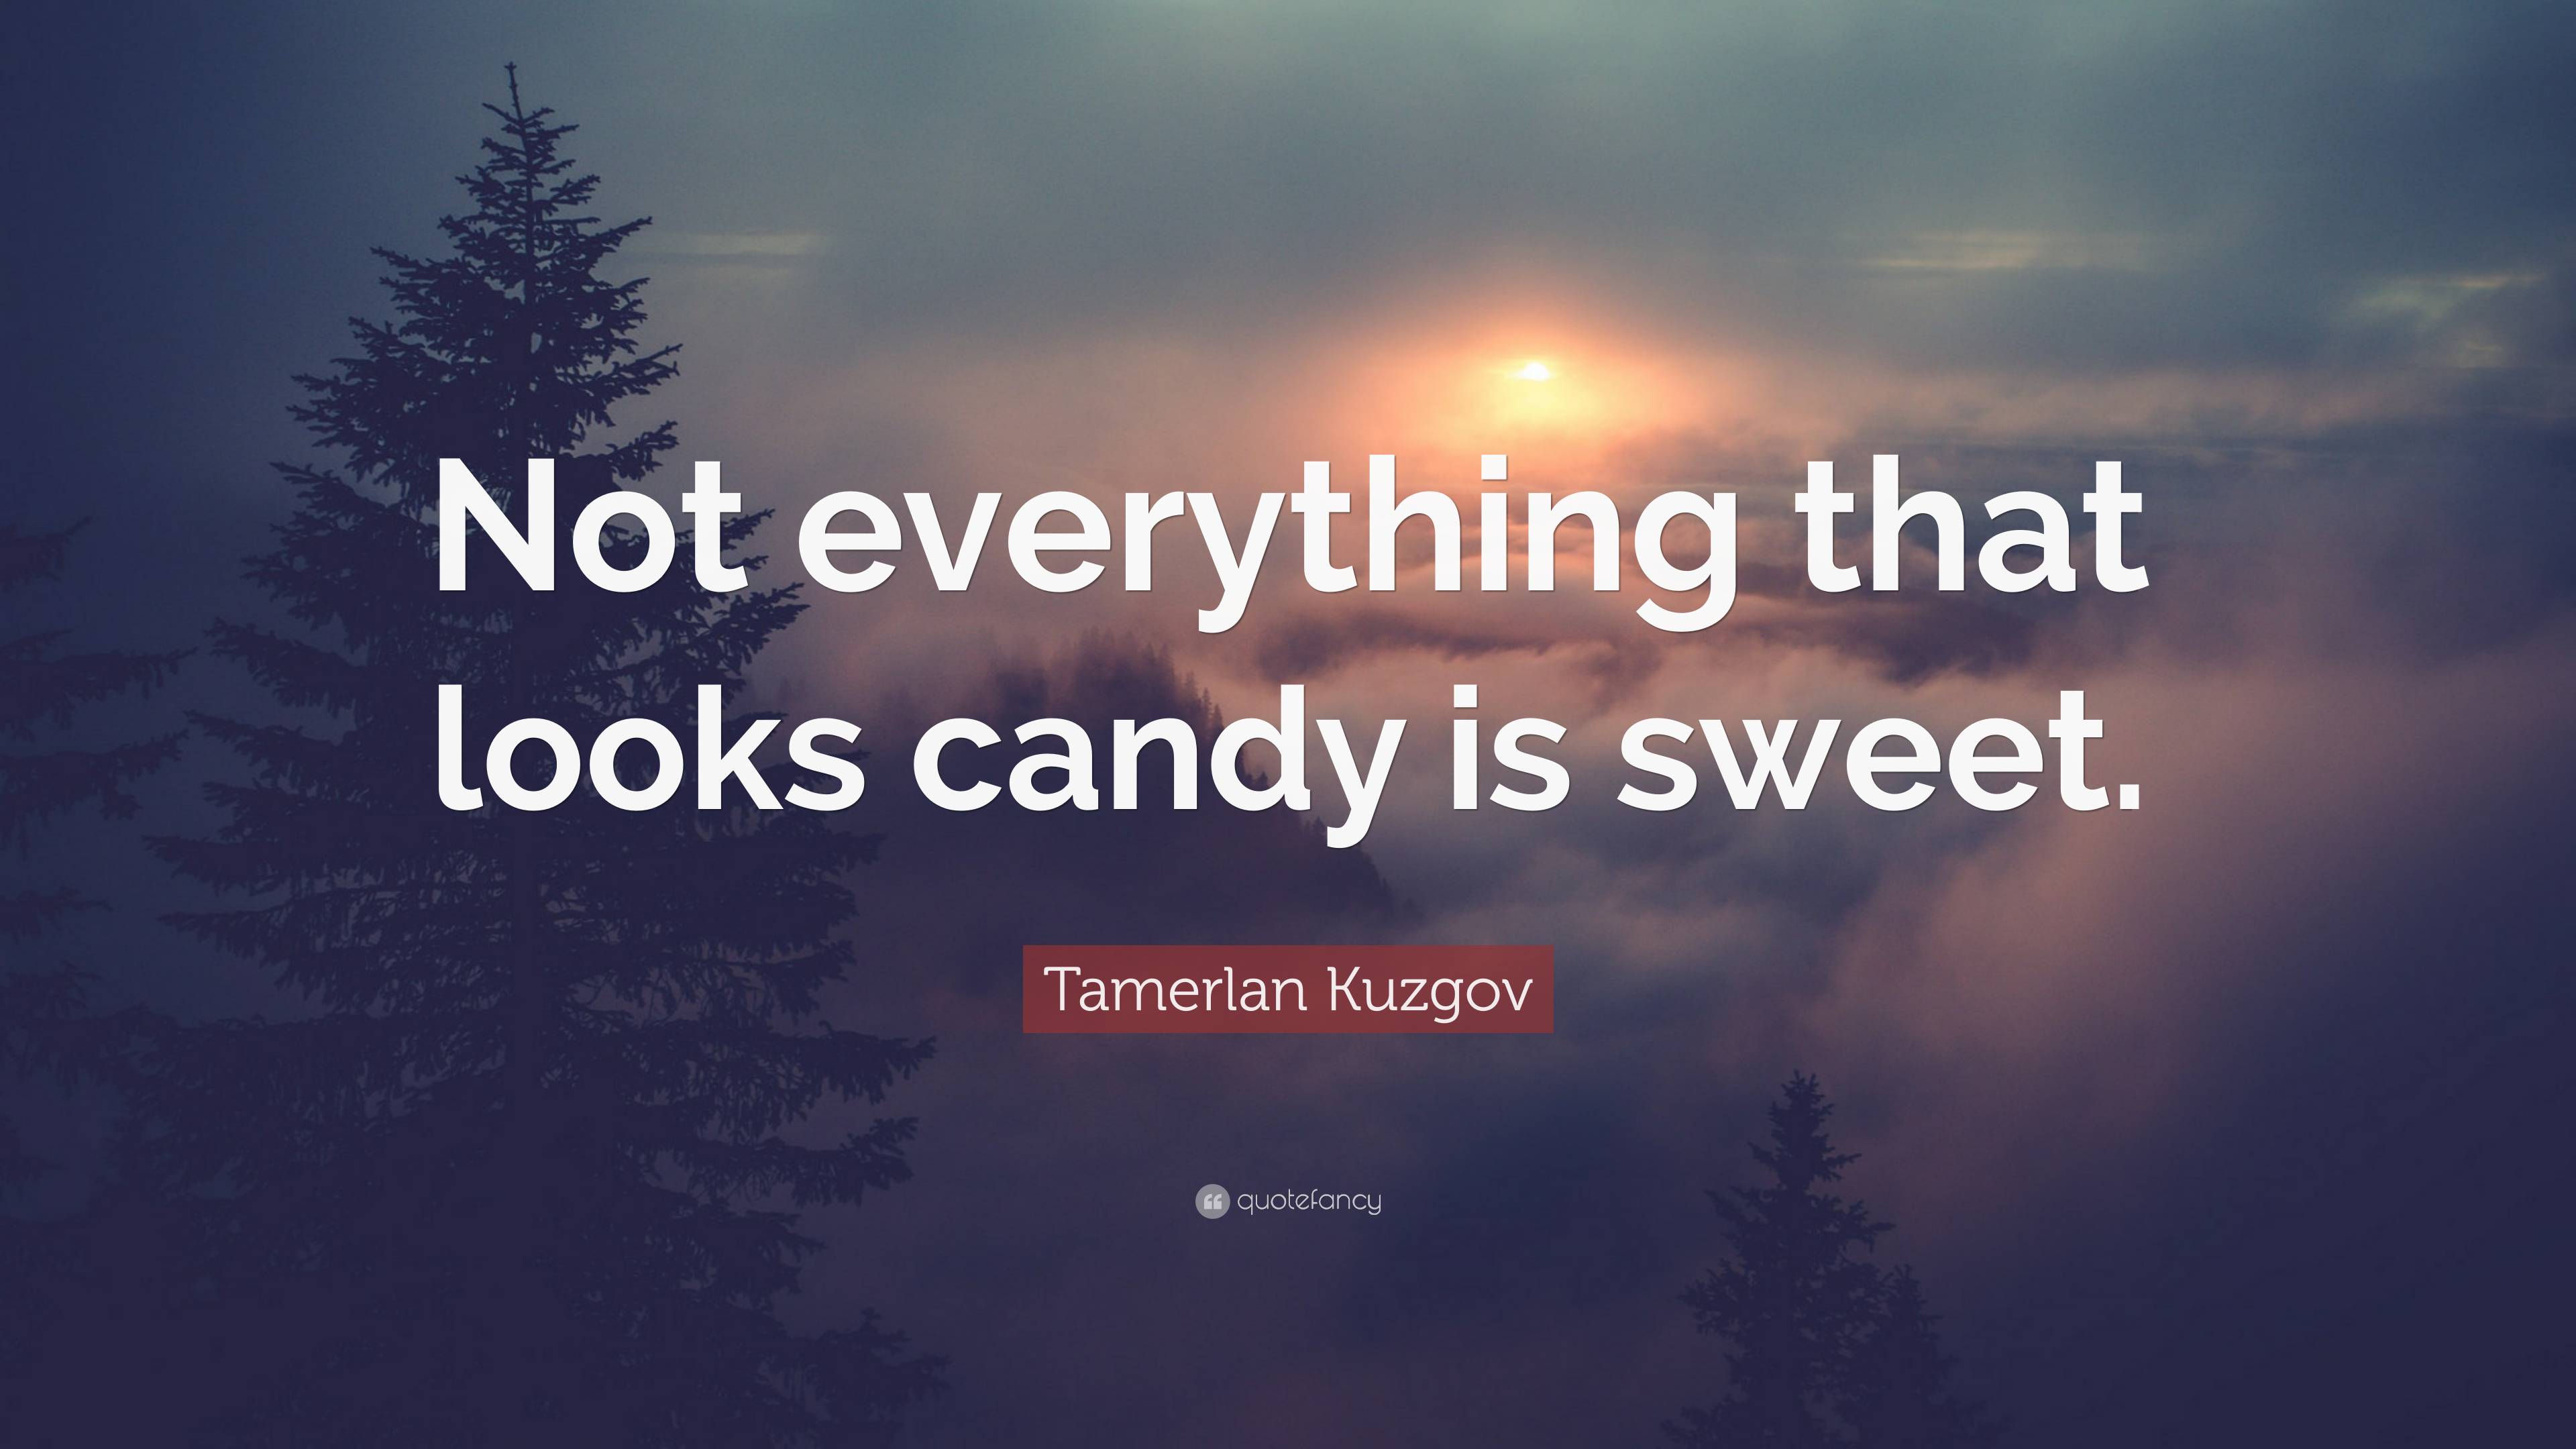 Tamerlan Kuzgov Quote: “Not everything that looks candy is sweet.”